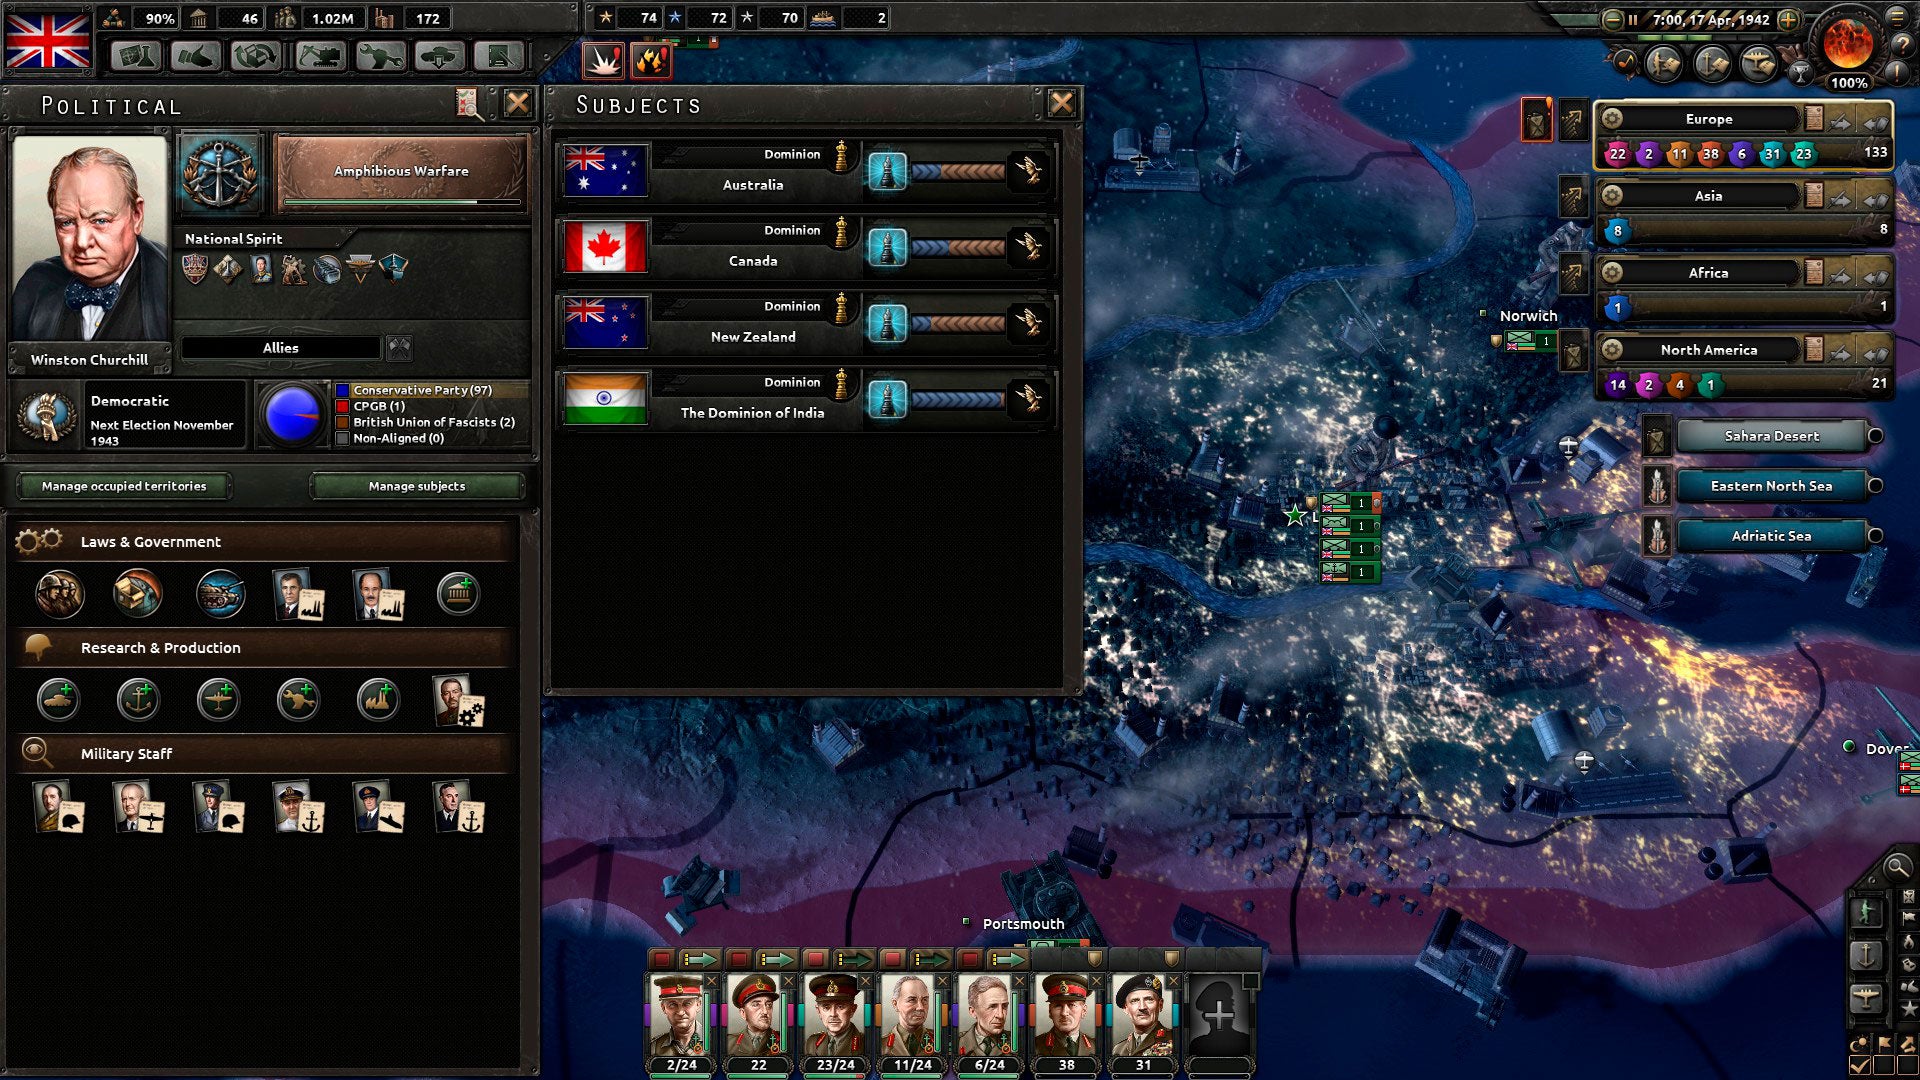 Hearts of Iron IV - Together for Victory DLC